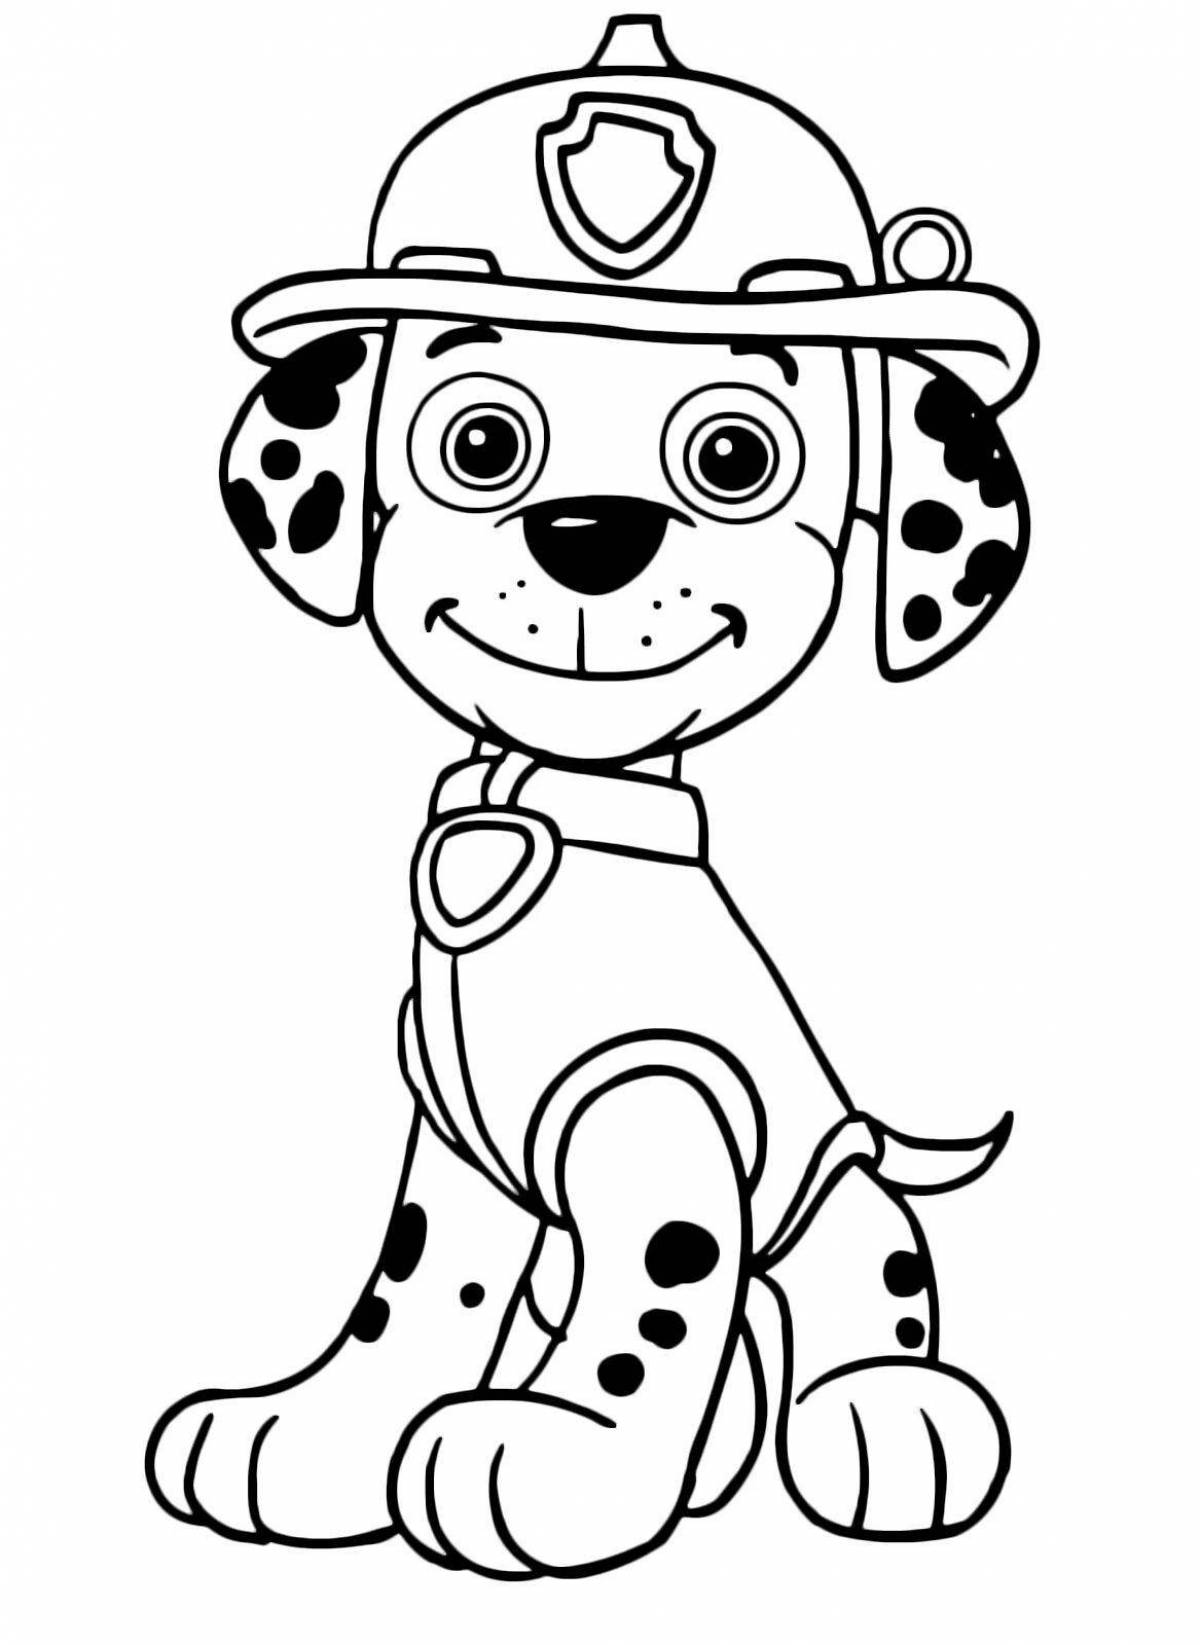 Marshal's amazing coloring book for kids